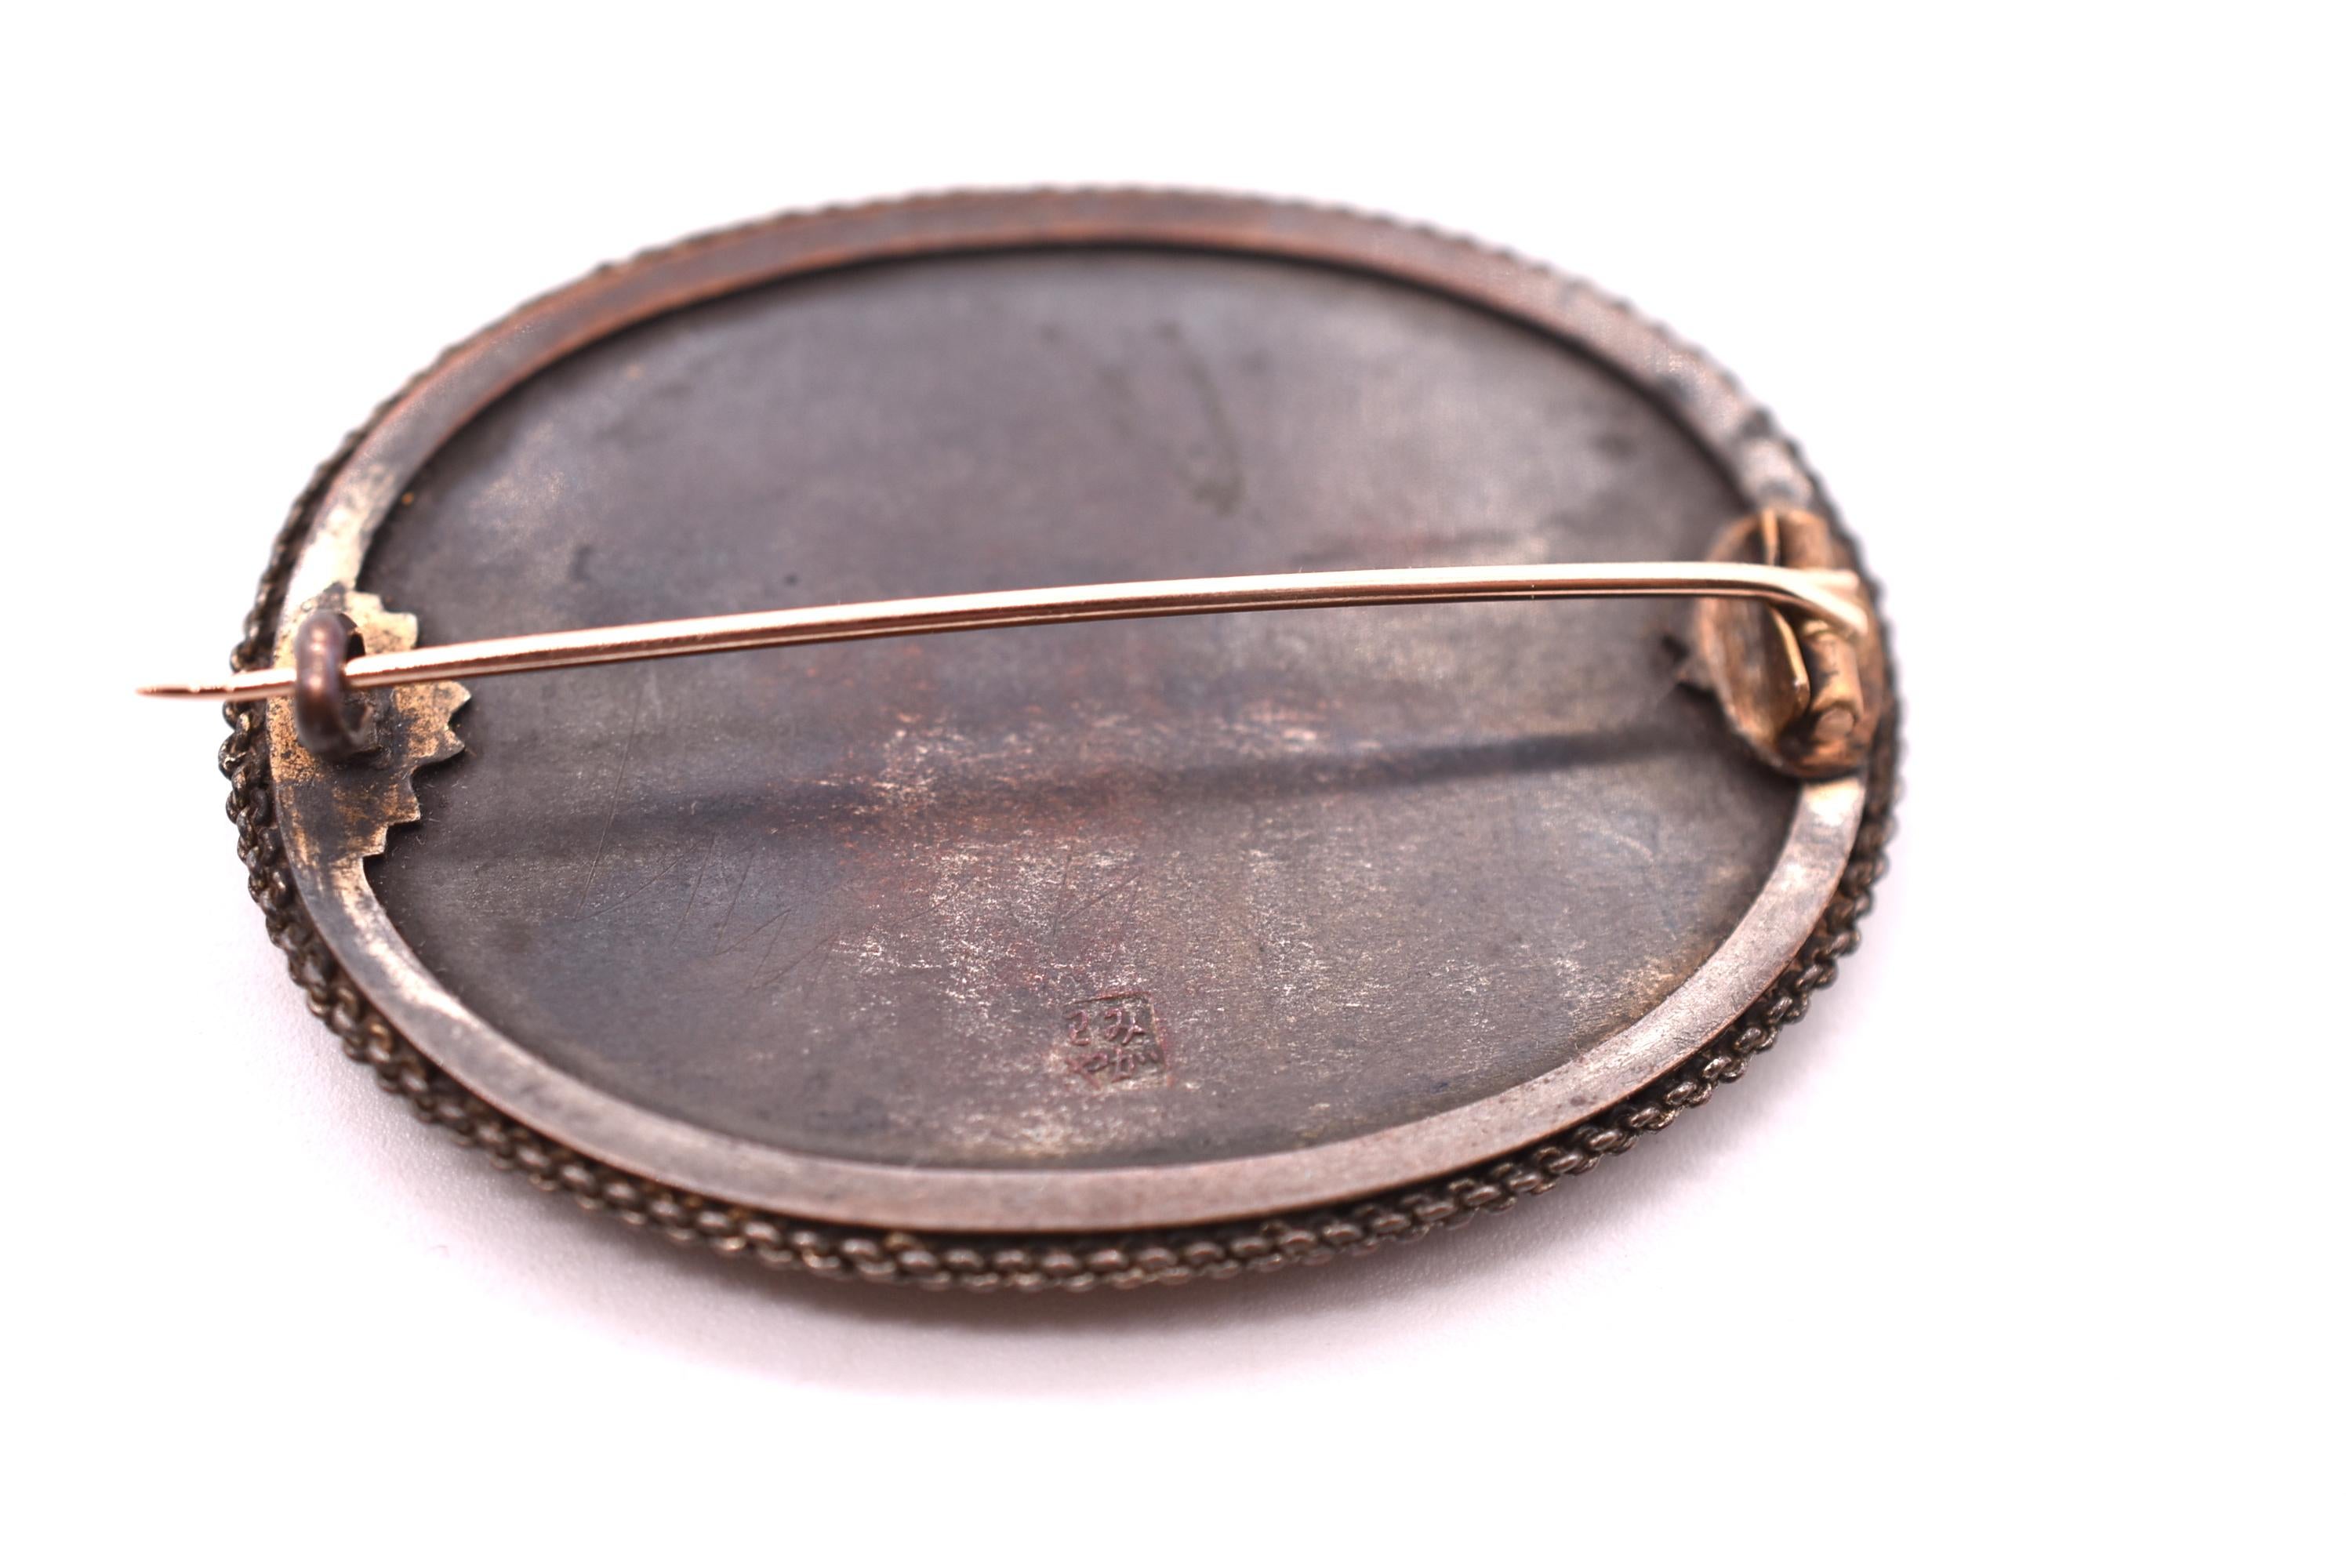 We adore this c 1880 Shakudo brooch featuring a rare image of Mt. Fugi in the background. Shakudo is an ancient Japanese art form which developed from the Samurai tradition of sword making. The metalwork used in the Shakudo technique consists of